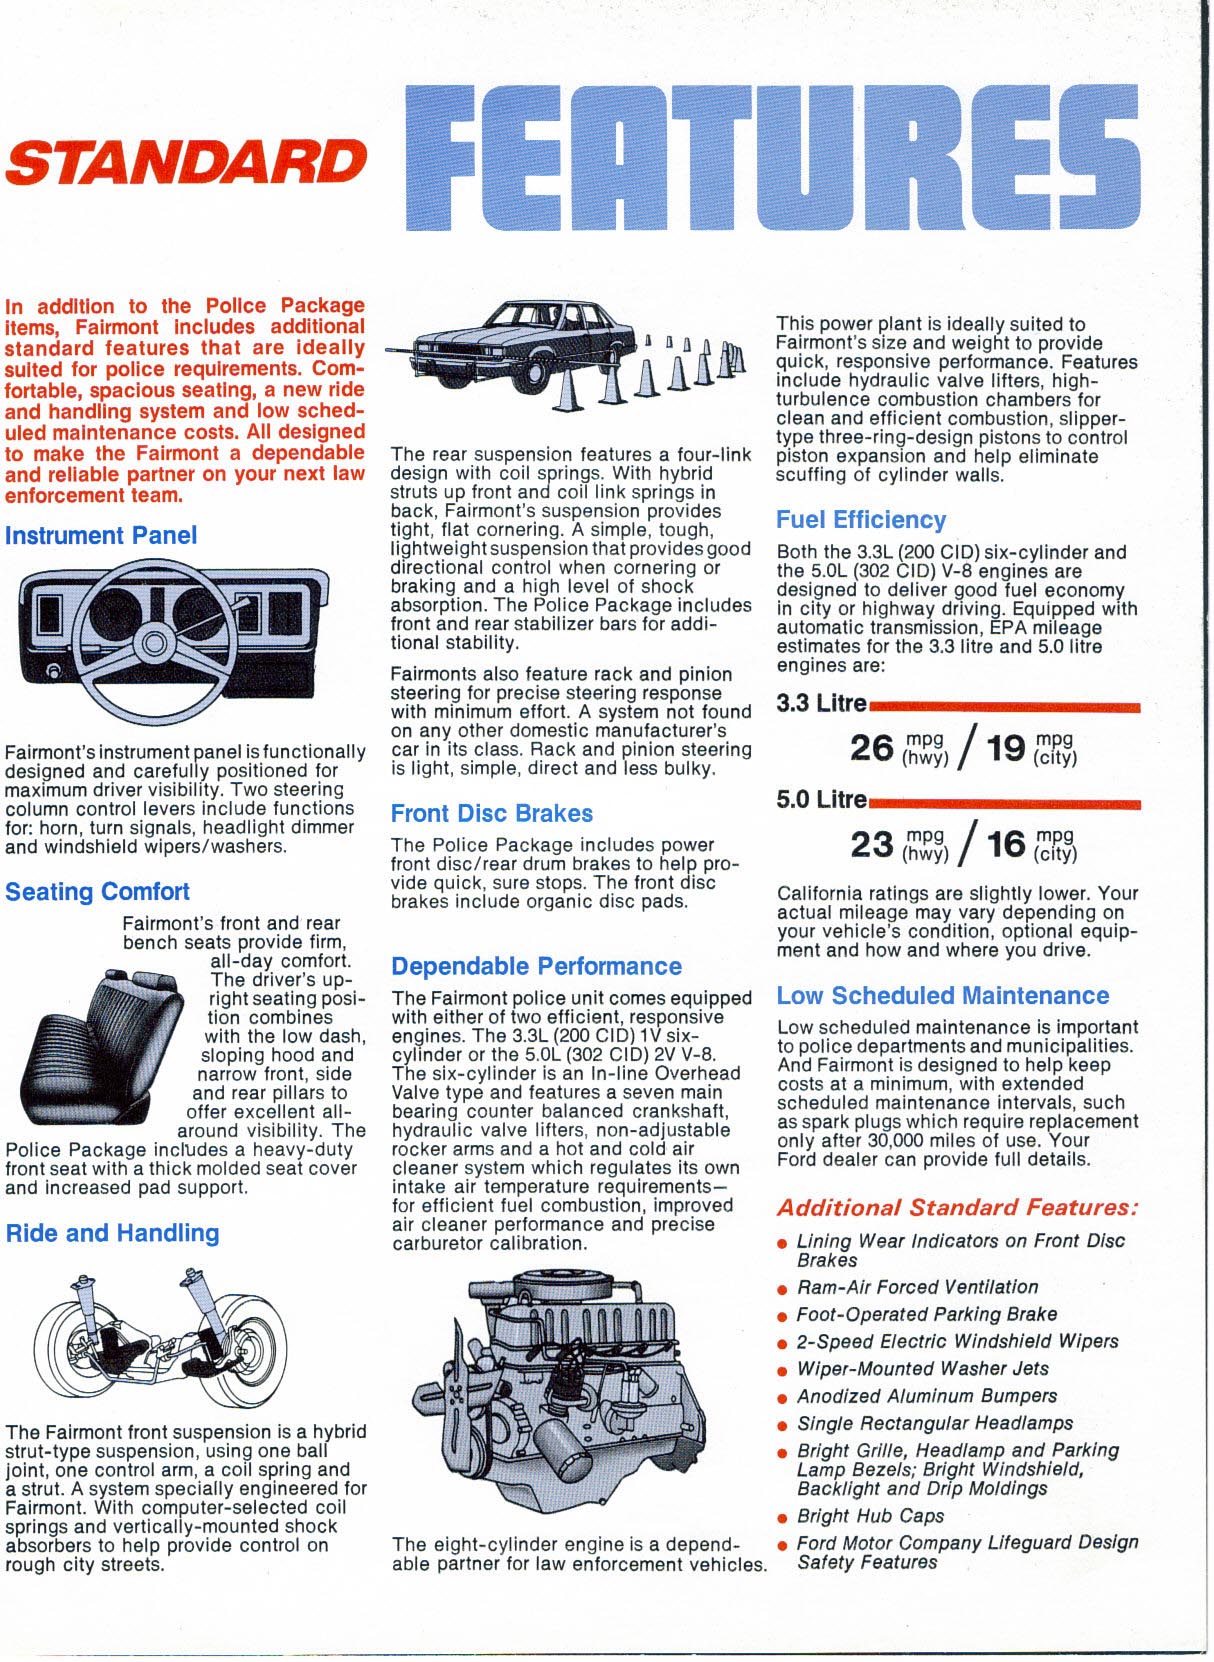 1978 Ford Fairmont Police Car Folder Page 2